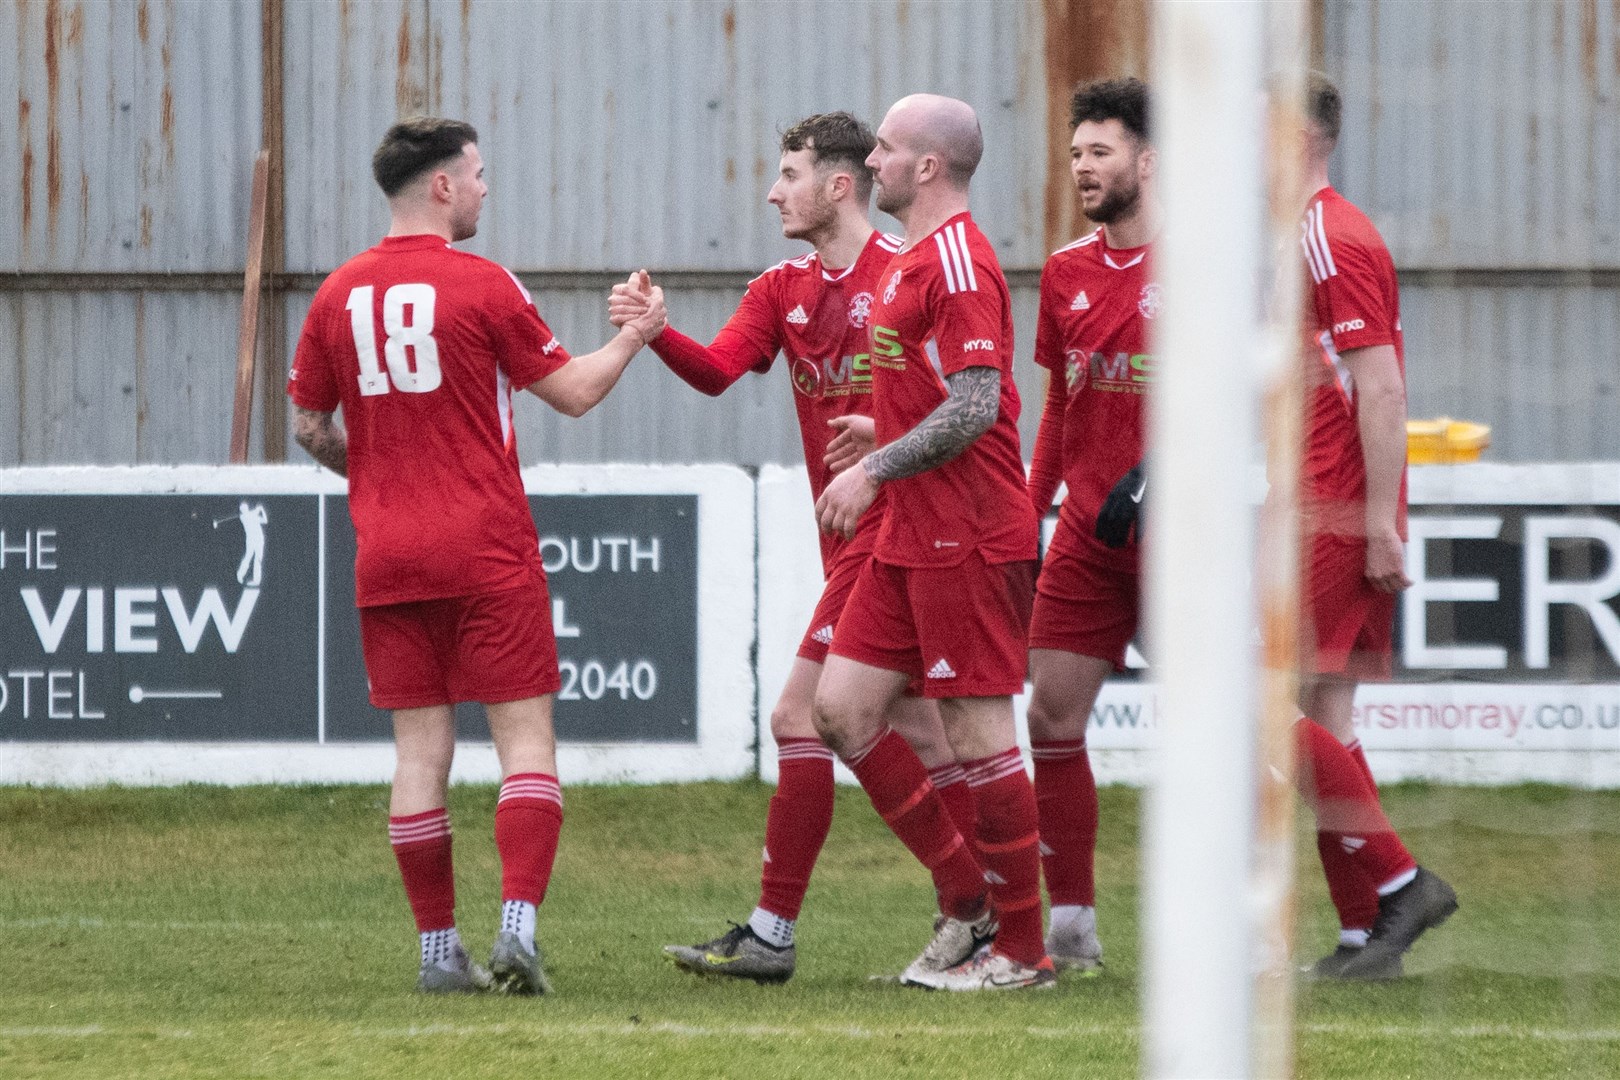 Lossie's Ross Morrison with team mates after scoring. ..Lossiemouth FC (2) vs Strathspey Thistle (1) - Highland Football League 23/24 - Grant Park, Lossie 10/02/2024...Picture: Daniel Forsyth..